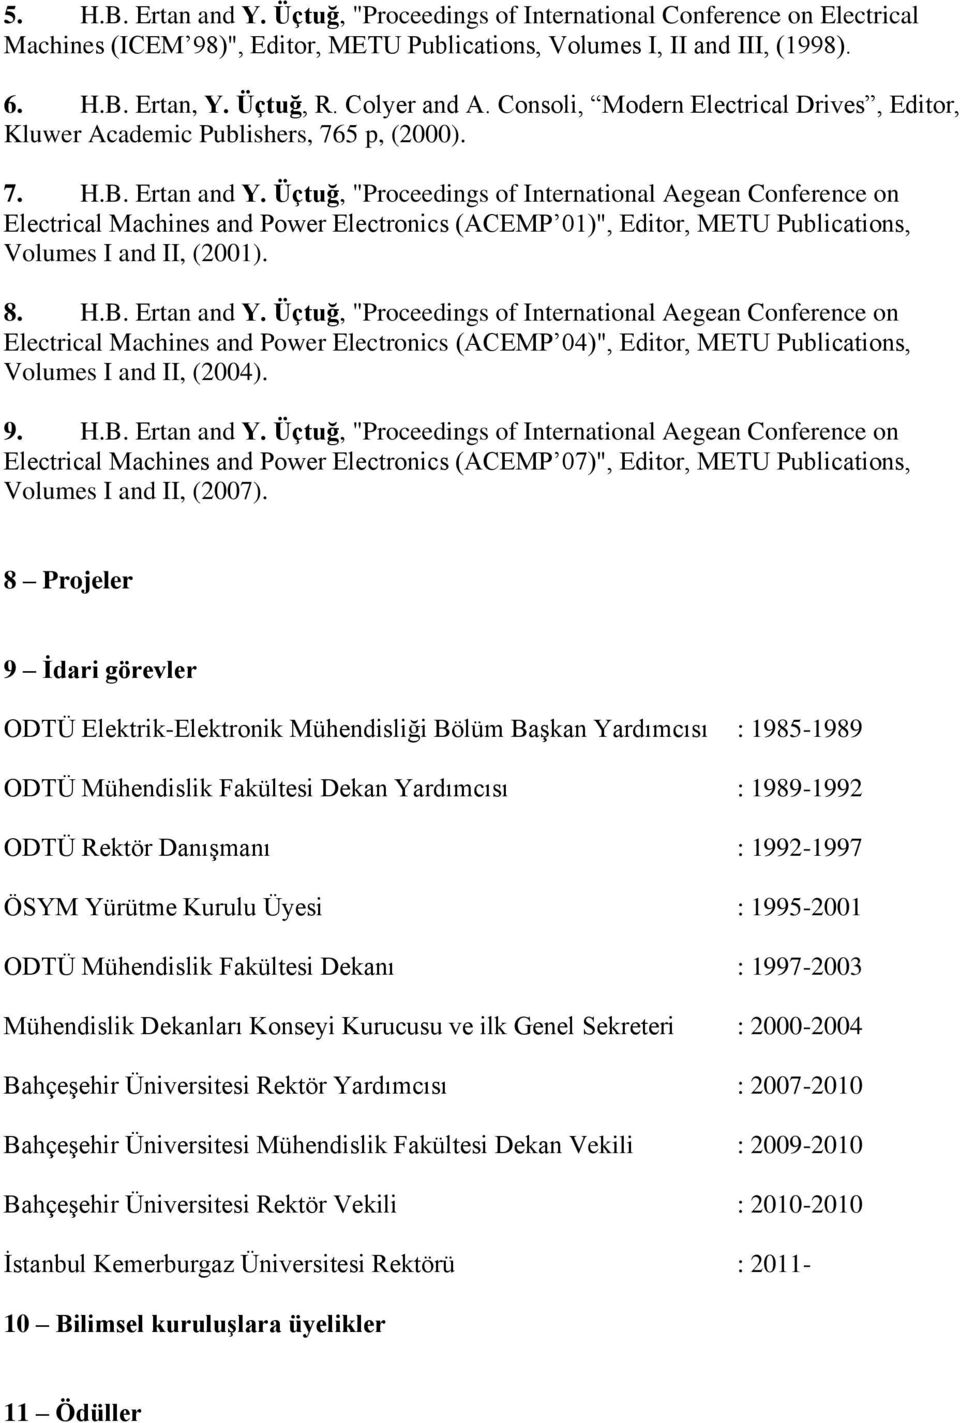 Üçtuğ, "Proceedings of International Aegean Conference on Electrical Machines and Power Electronics (ACEMP 01)", Editor, METU Publications, Volumes I and II, (2001). 8. H.B. Ertan and Y.